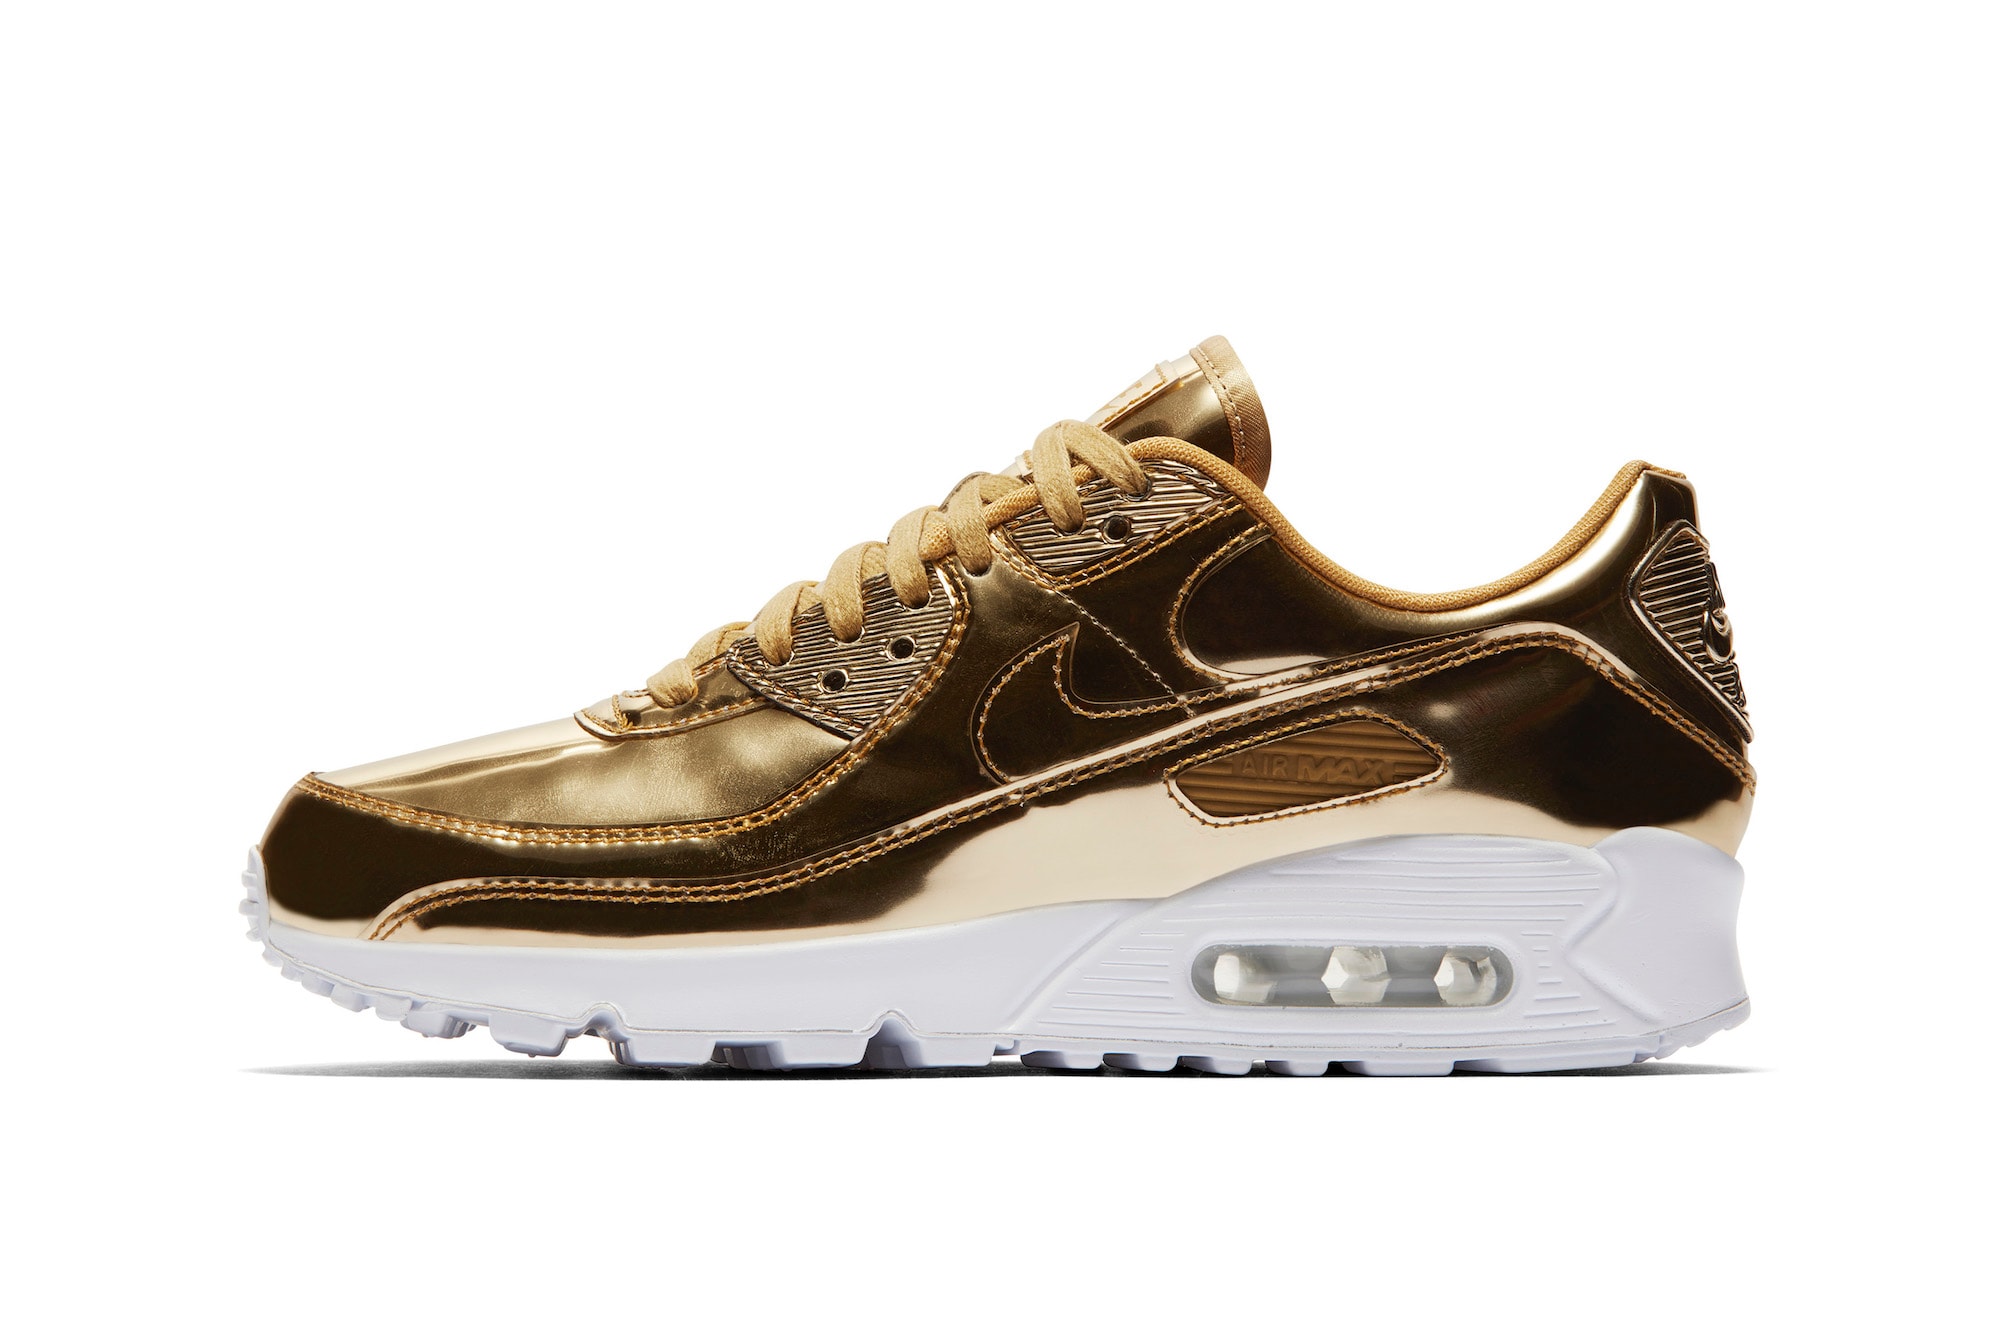 Nike Air Max 90 "Metallic Pack" Silver & Gold Sneaker Release Shiny 